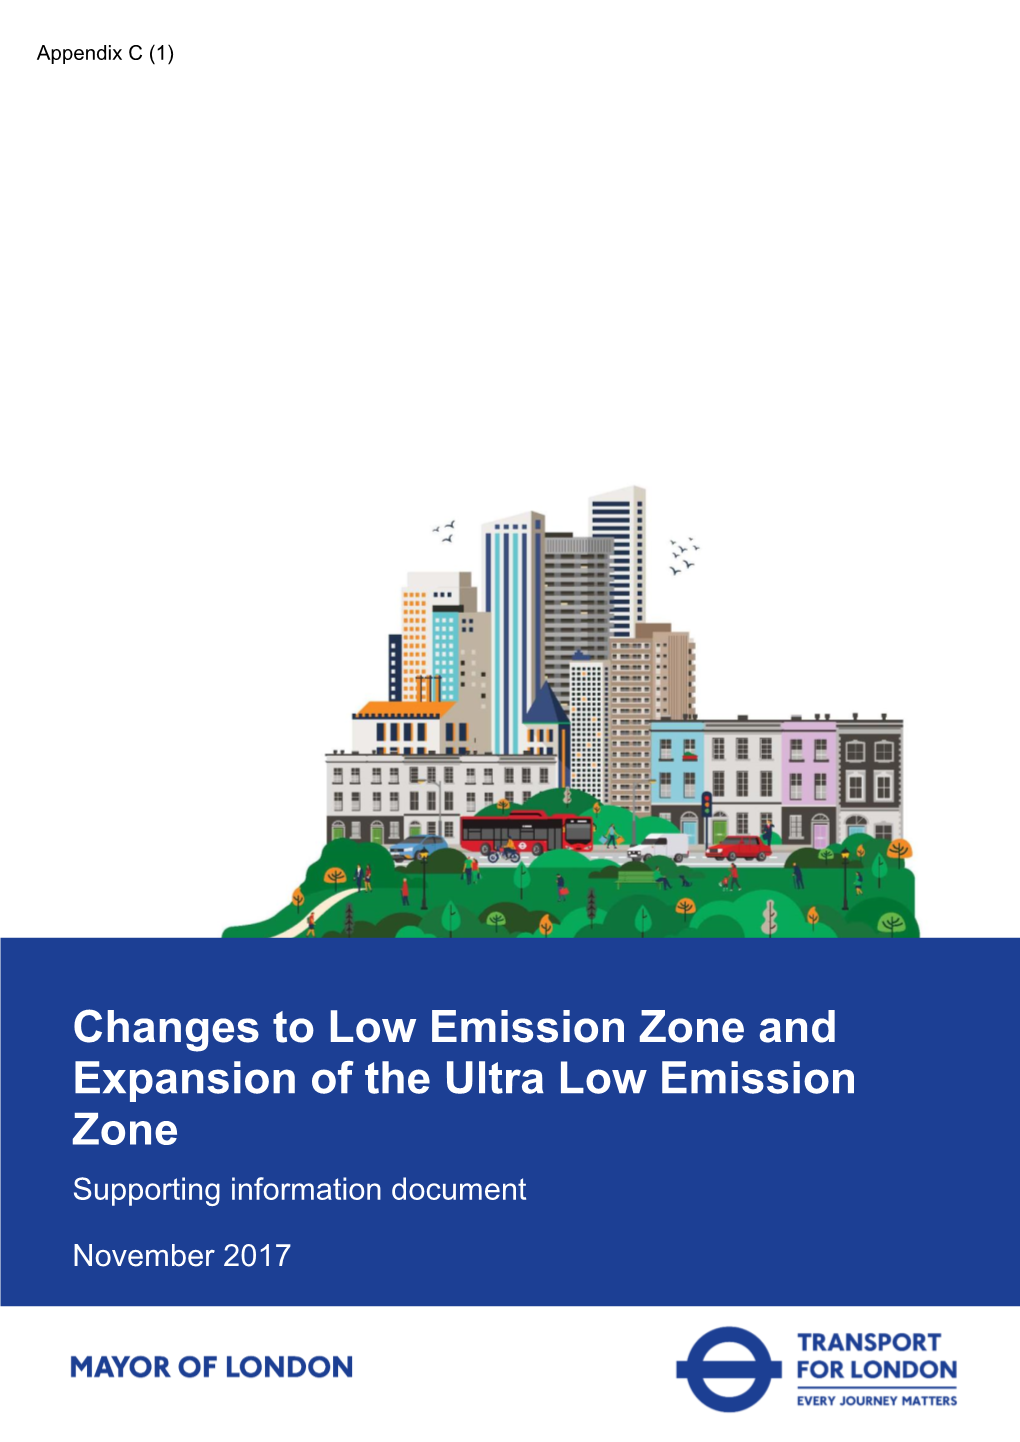 Changes to Low Emission Zone and Expansion of the Ultra Low Emission Zone Supporting Information Document